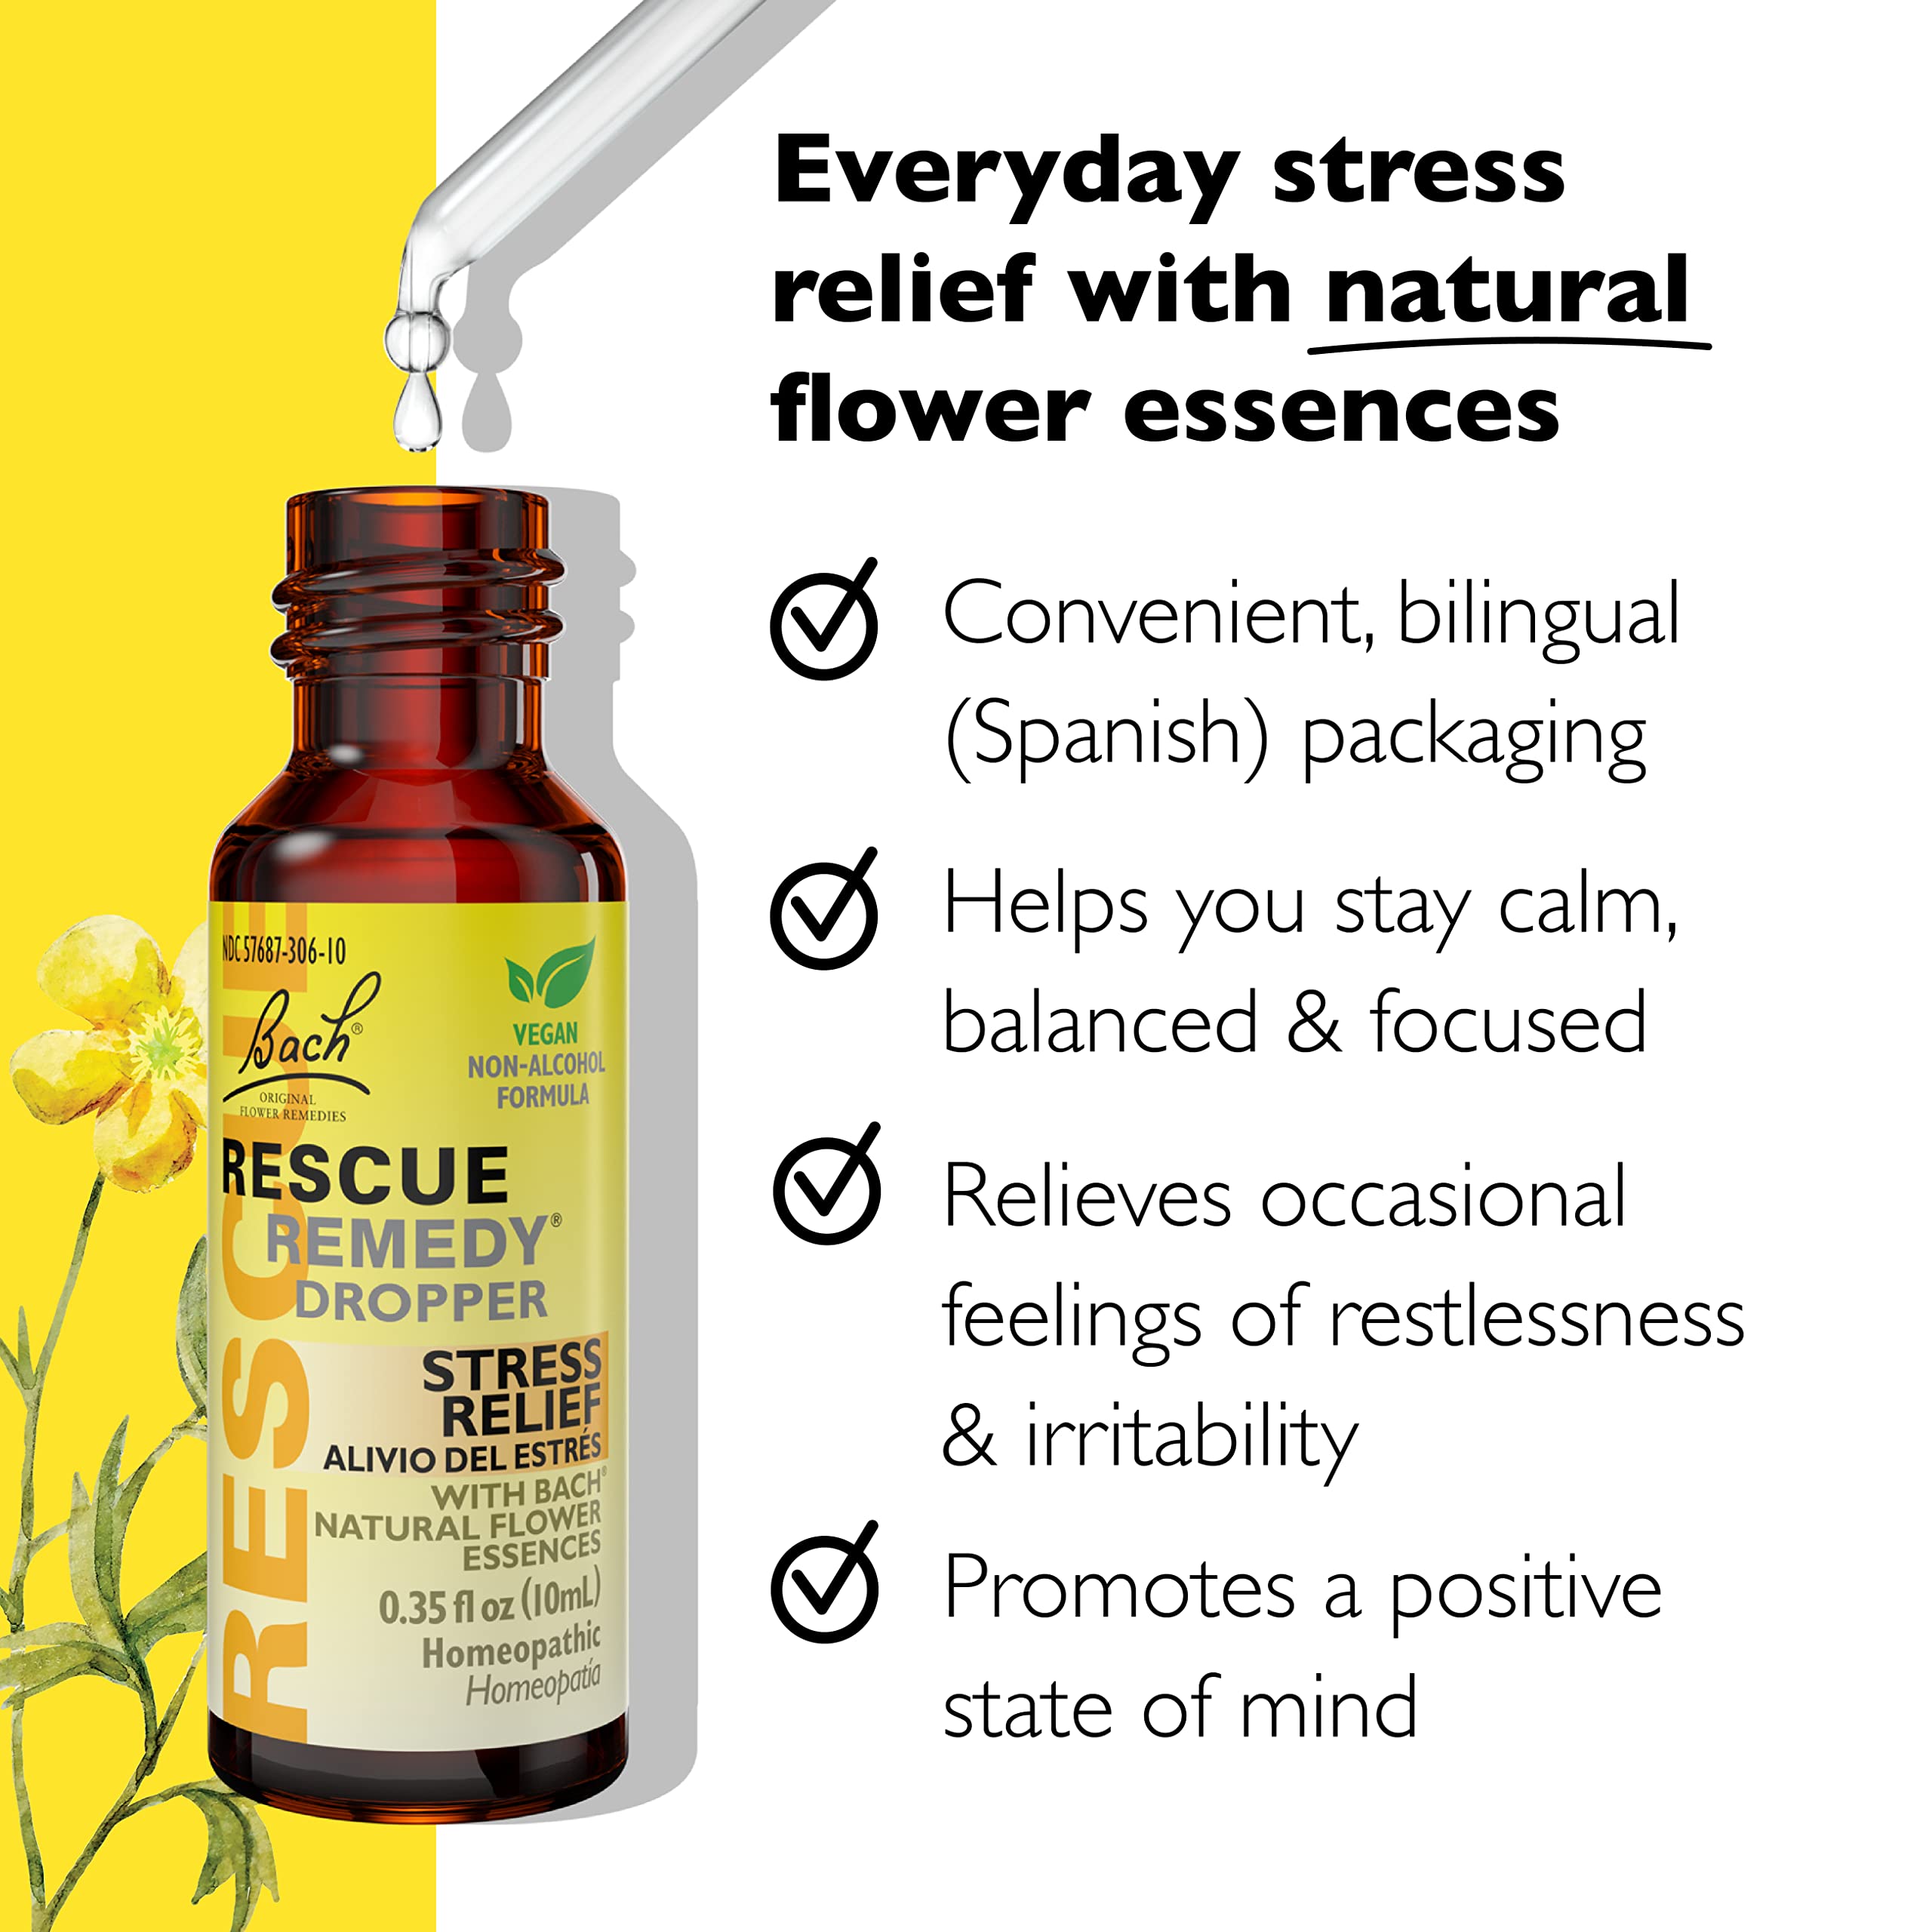 Bach RESCUE Remedy Dropper 10mL, Natural Stress Relief, Homeopathic Flower Essence, Vegan, Gluten & Sugar-Free, Non-Habit Forming (Non-Alcohol Formula)